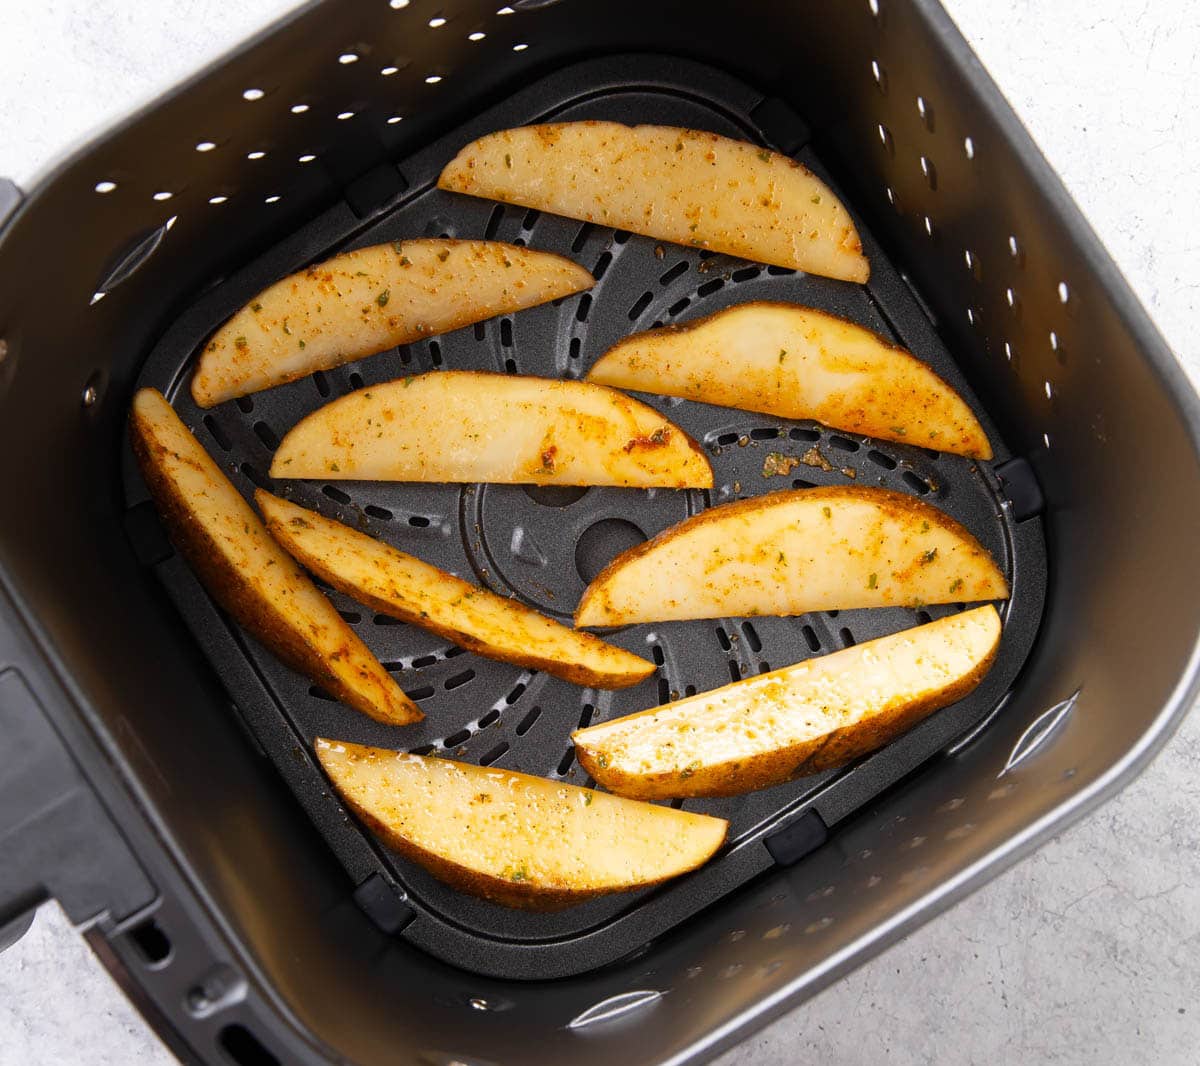 Potato wedges in air fryer laid out in a single, spaced out layer to avoid crowding to cook evenly.